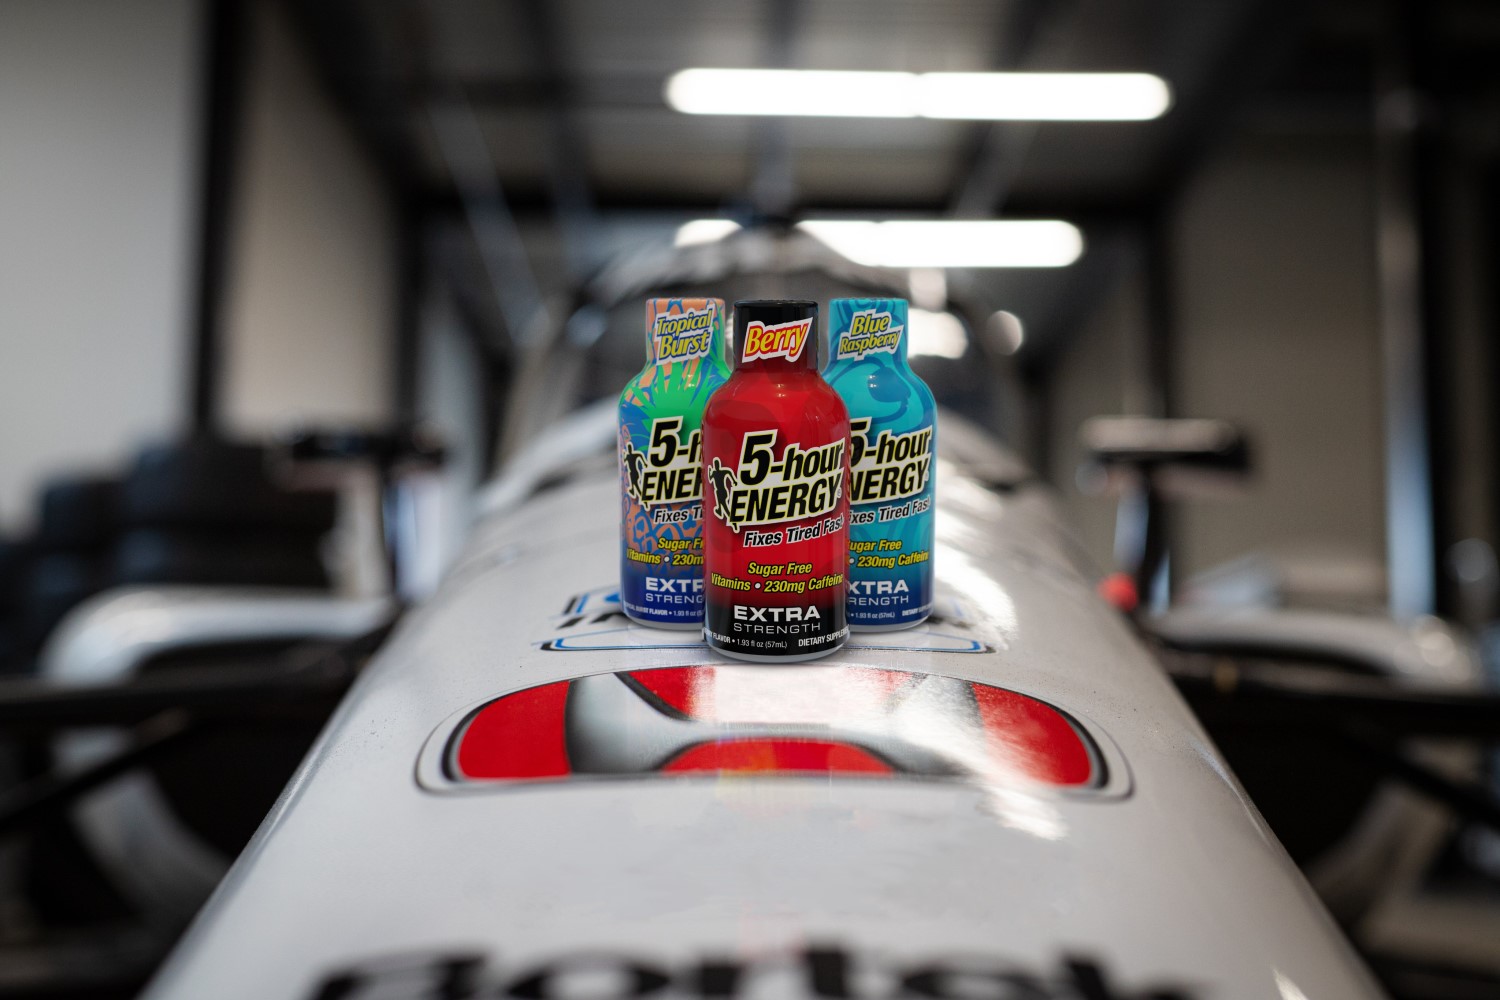 5-Hour Energy to be an associate sponsor on the #30 Fittipaldi car in 2024.